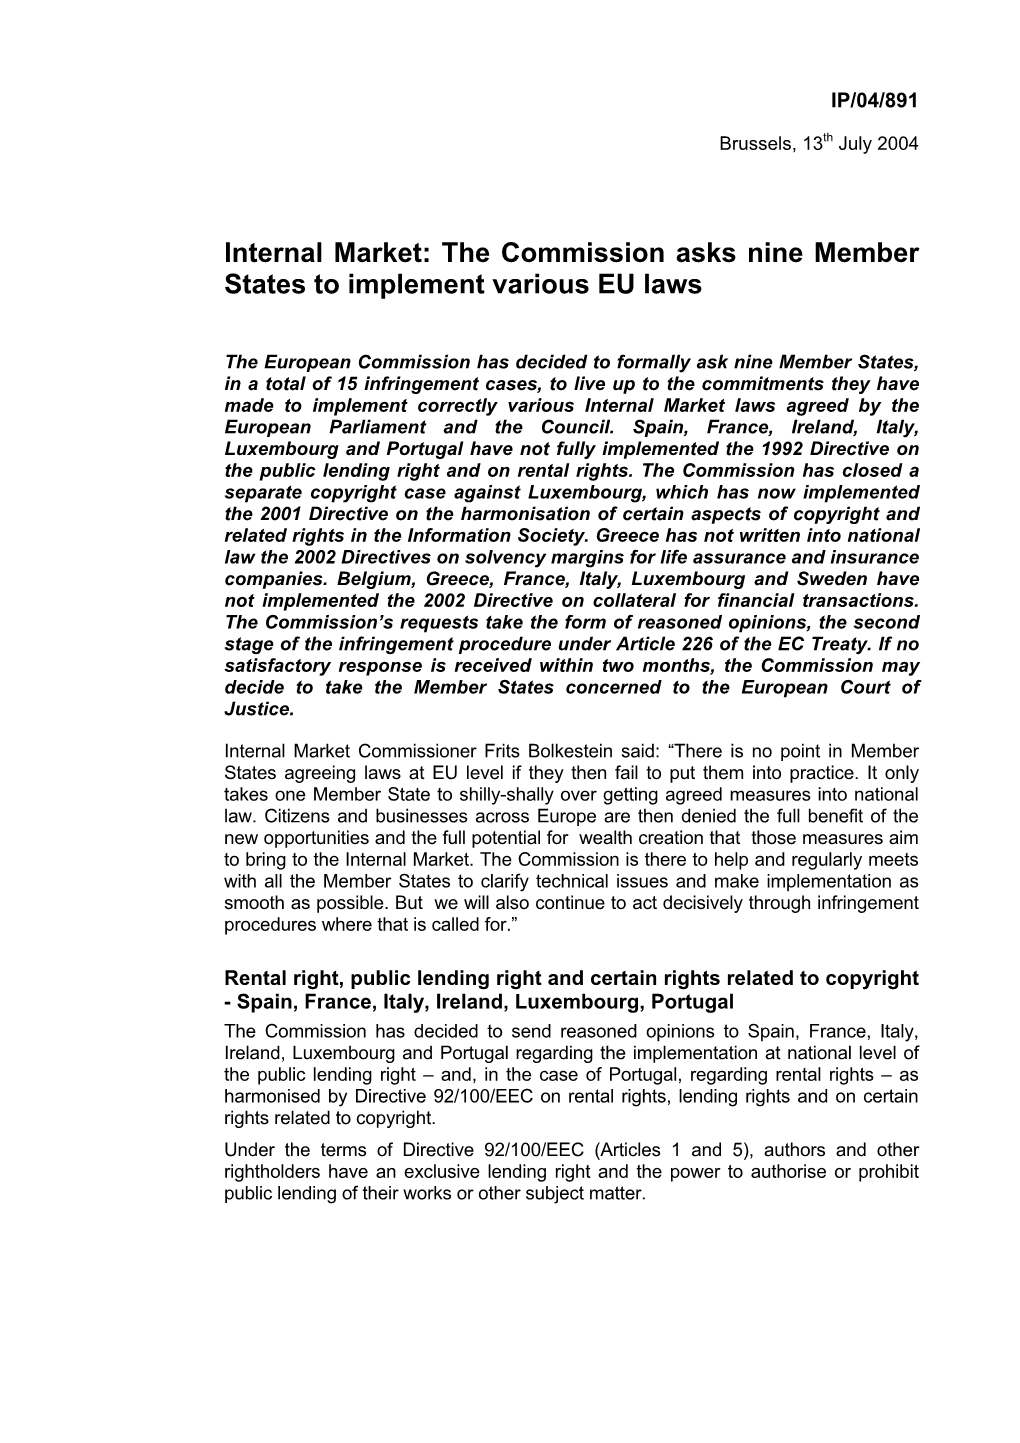 Internal Market: the Commission Asks Nine Member States to Implement Various EU Laws